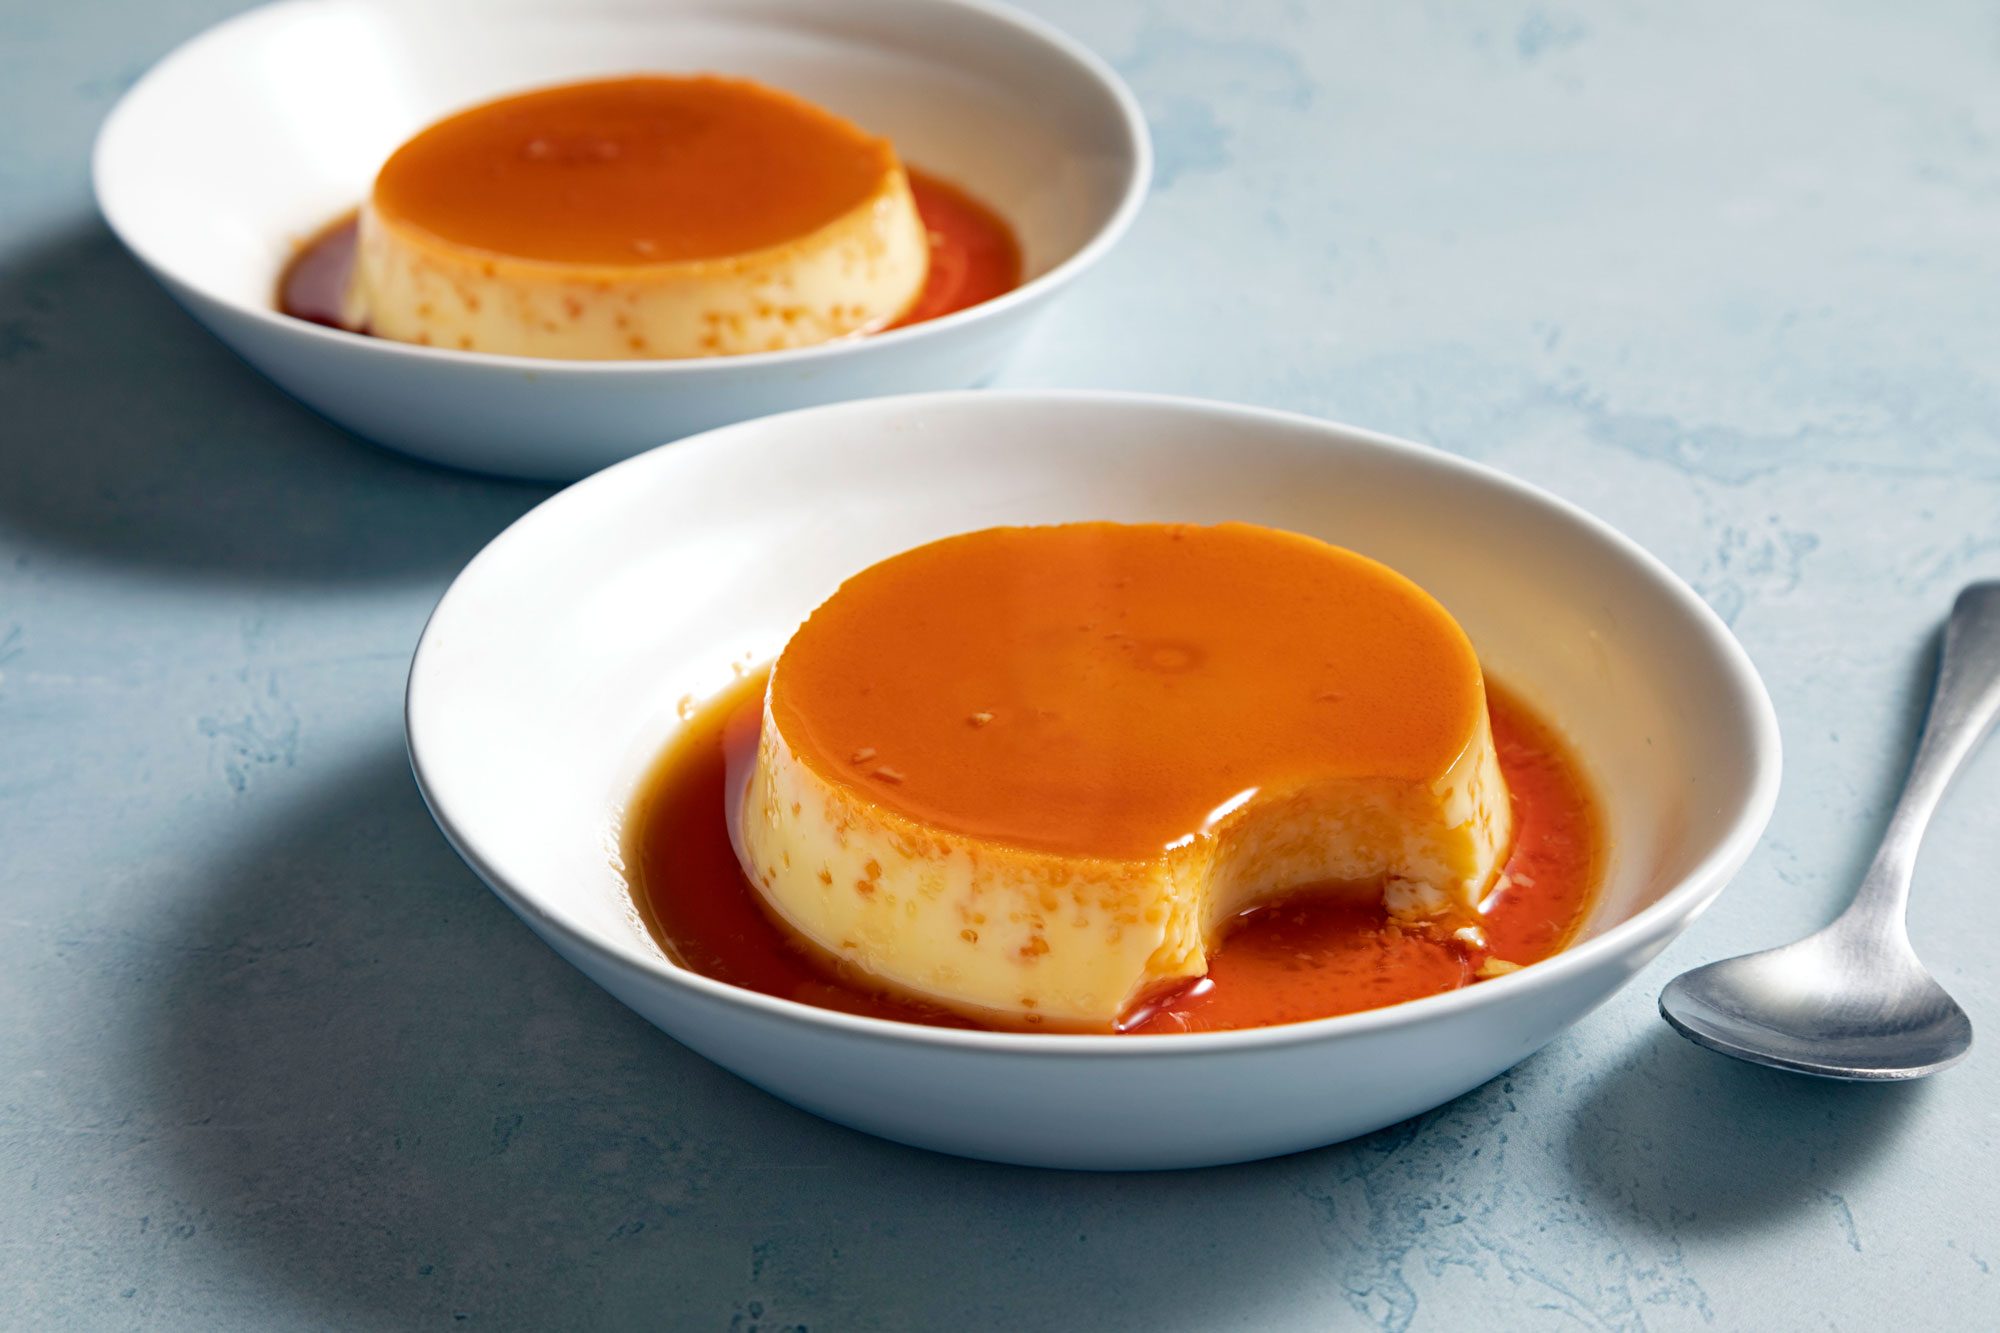 Two bowls of caramel custard with sauce